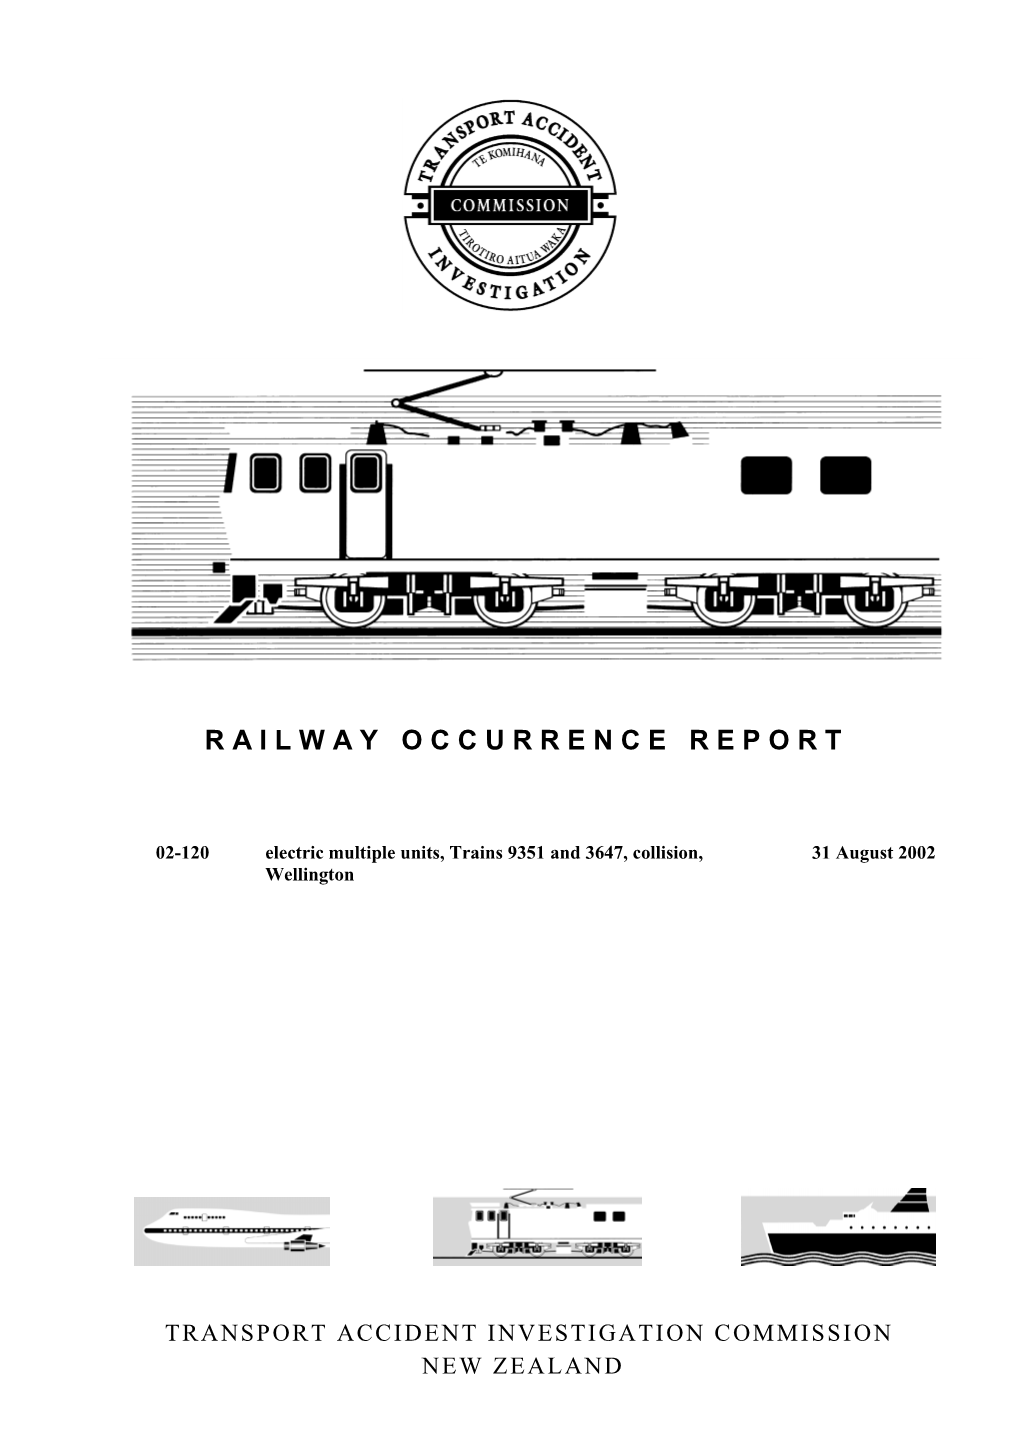 02-120. Electric Multiple Units, Trains 9351 and 3647, Collision